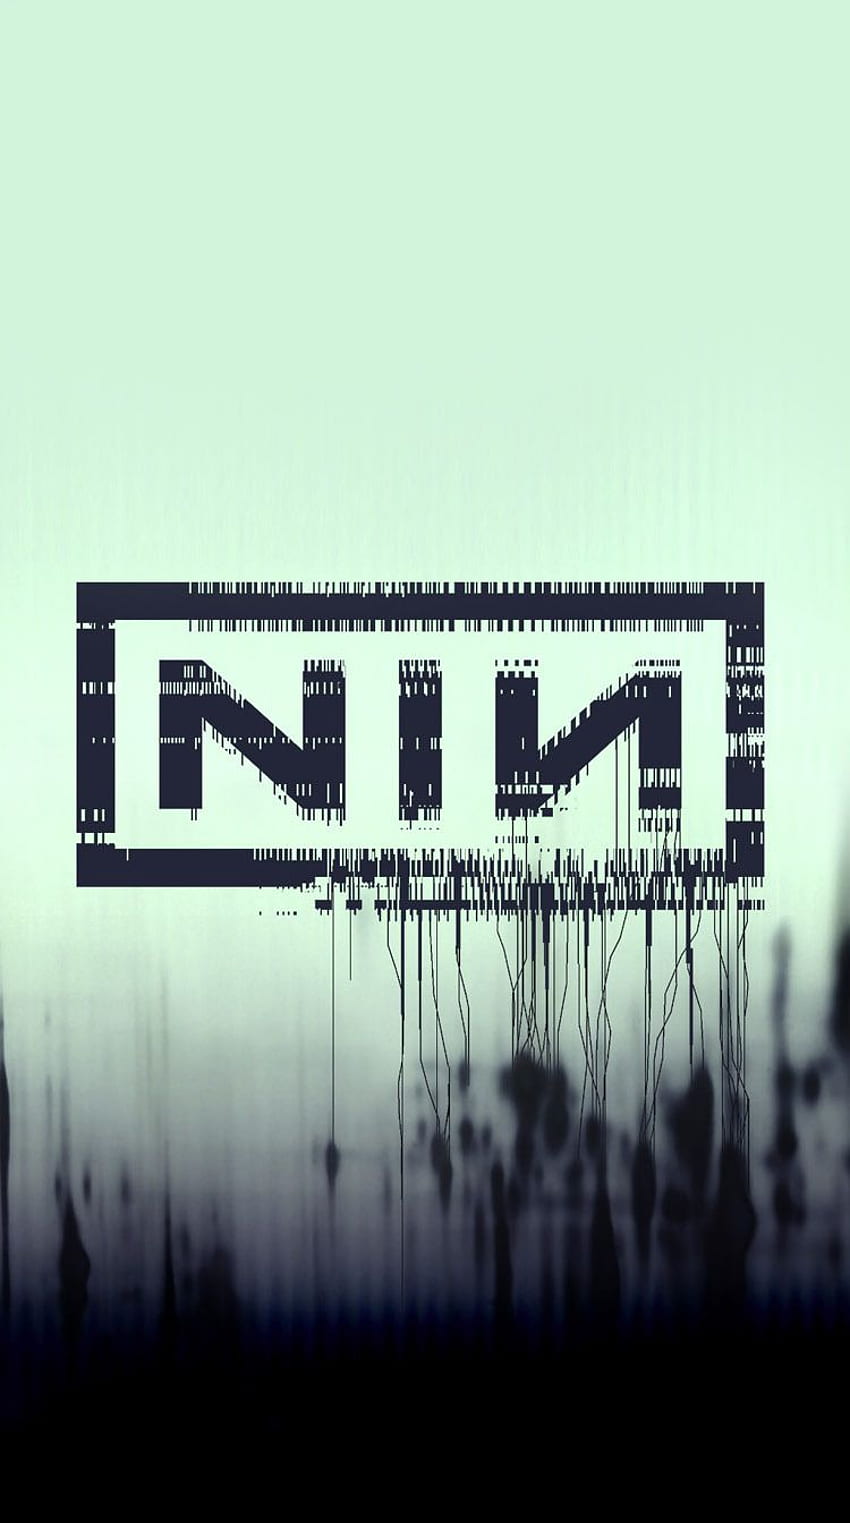 Planet on Nine Inch Nails . Music album art, Cool background, Nine inch nails HD phone wallpaper